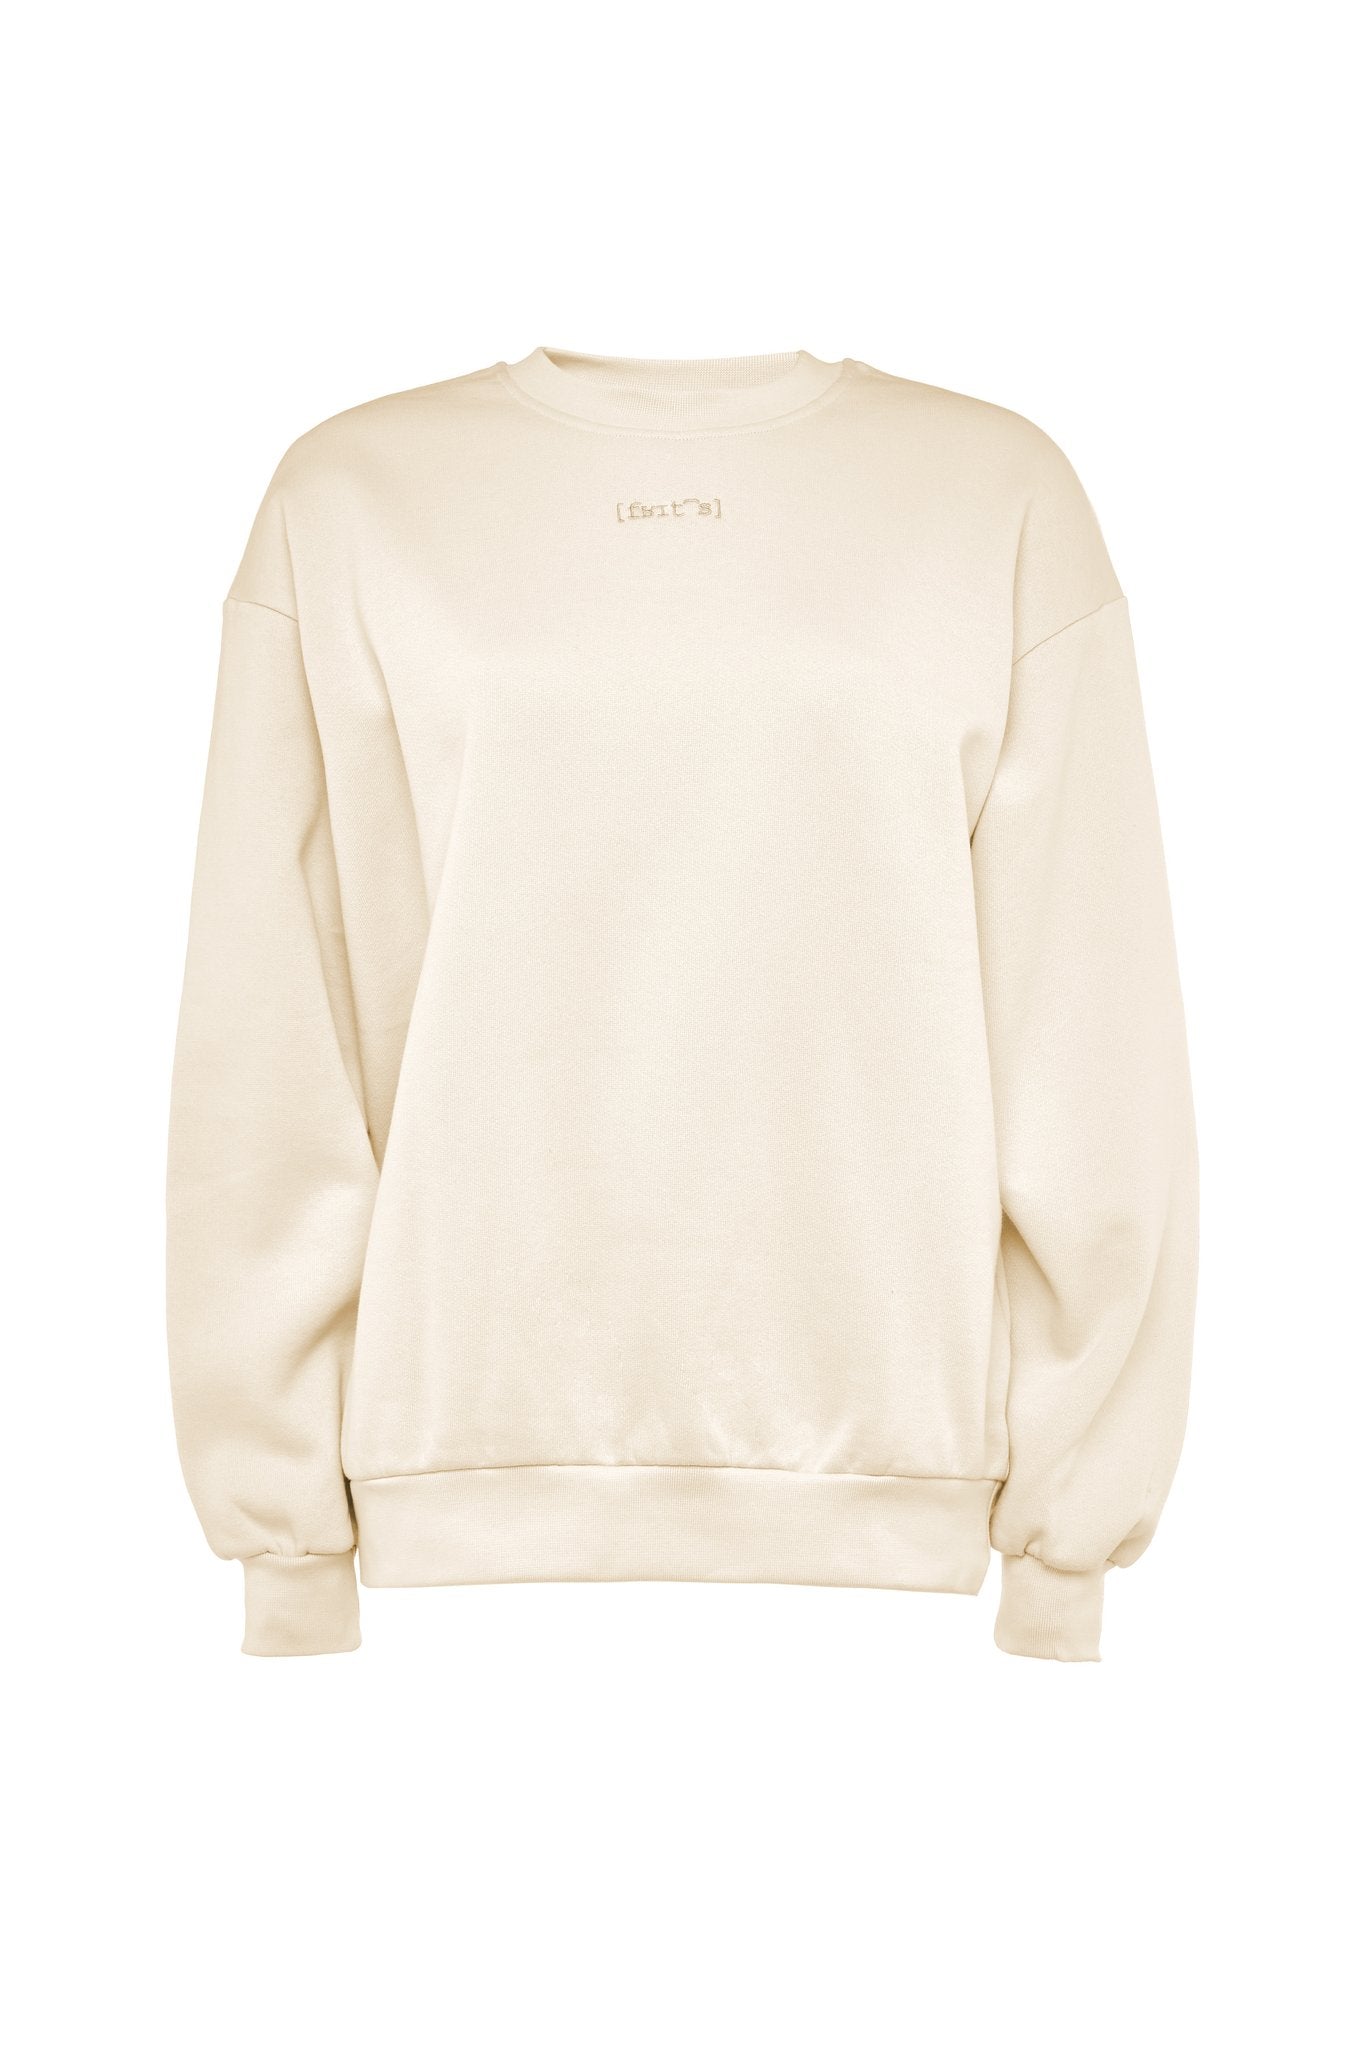 THE UNISEX SWEATER - OATMEAL - FRITZ THE LABEL